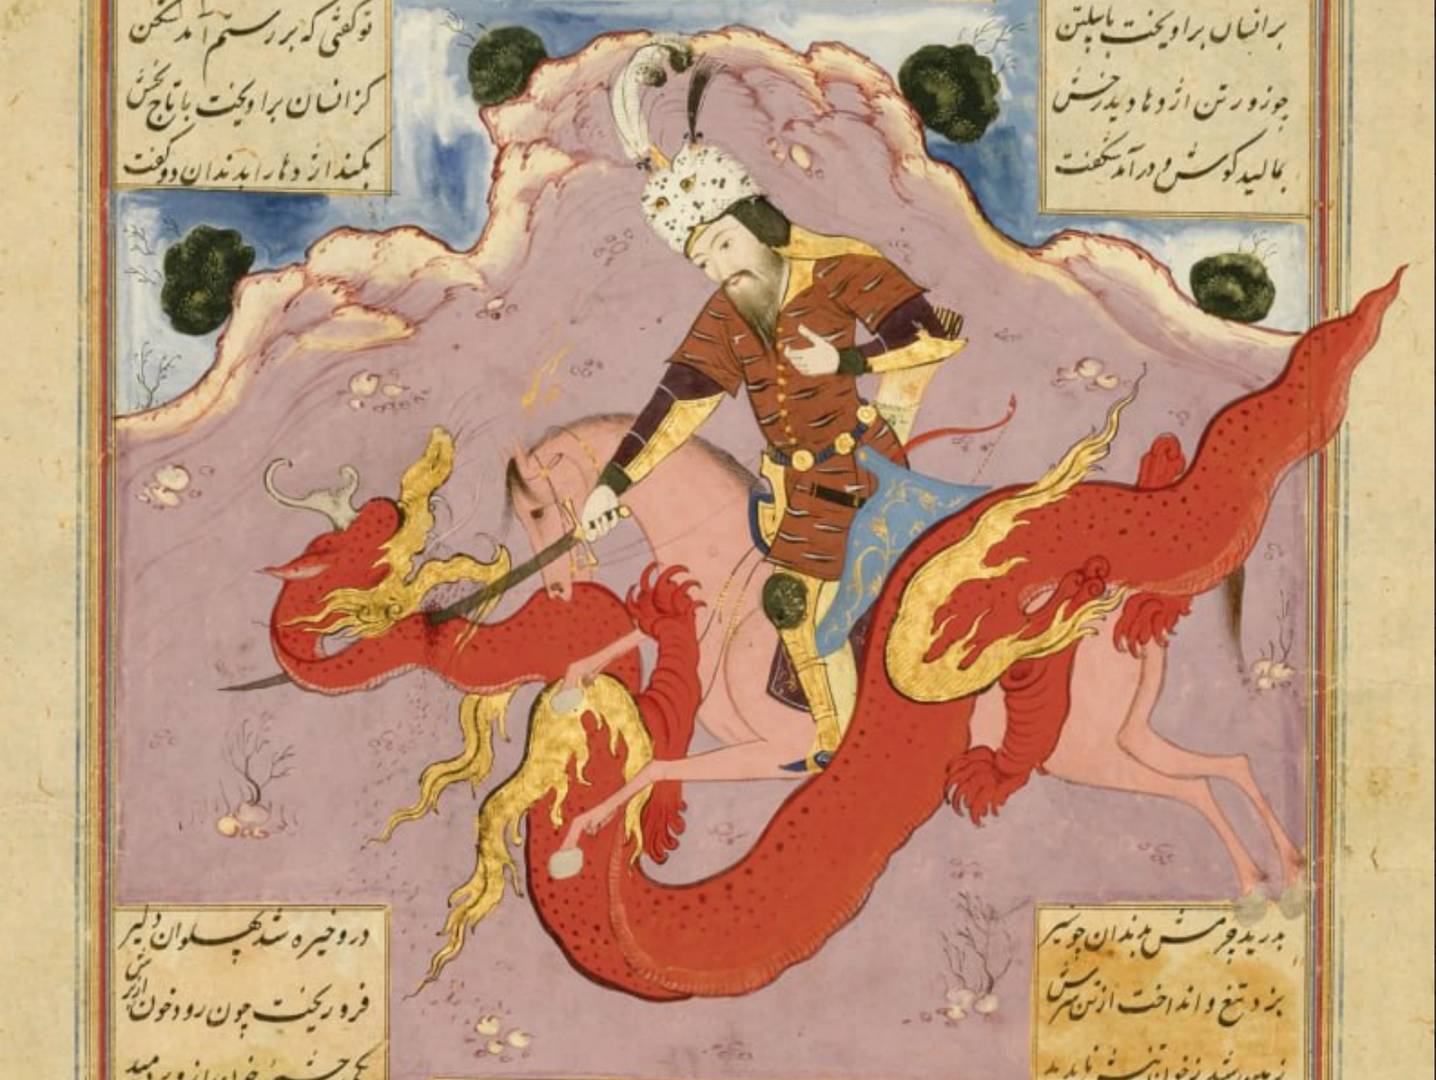 Rustam Killing the Dragon. A page form the Shahnameh manuscript by Firdausi, the 17th century